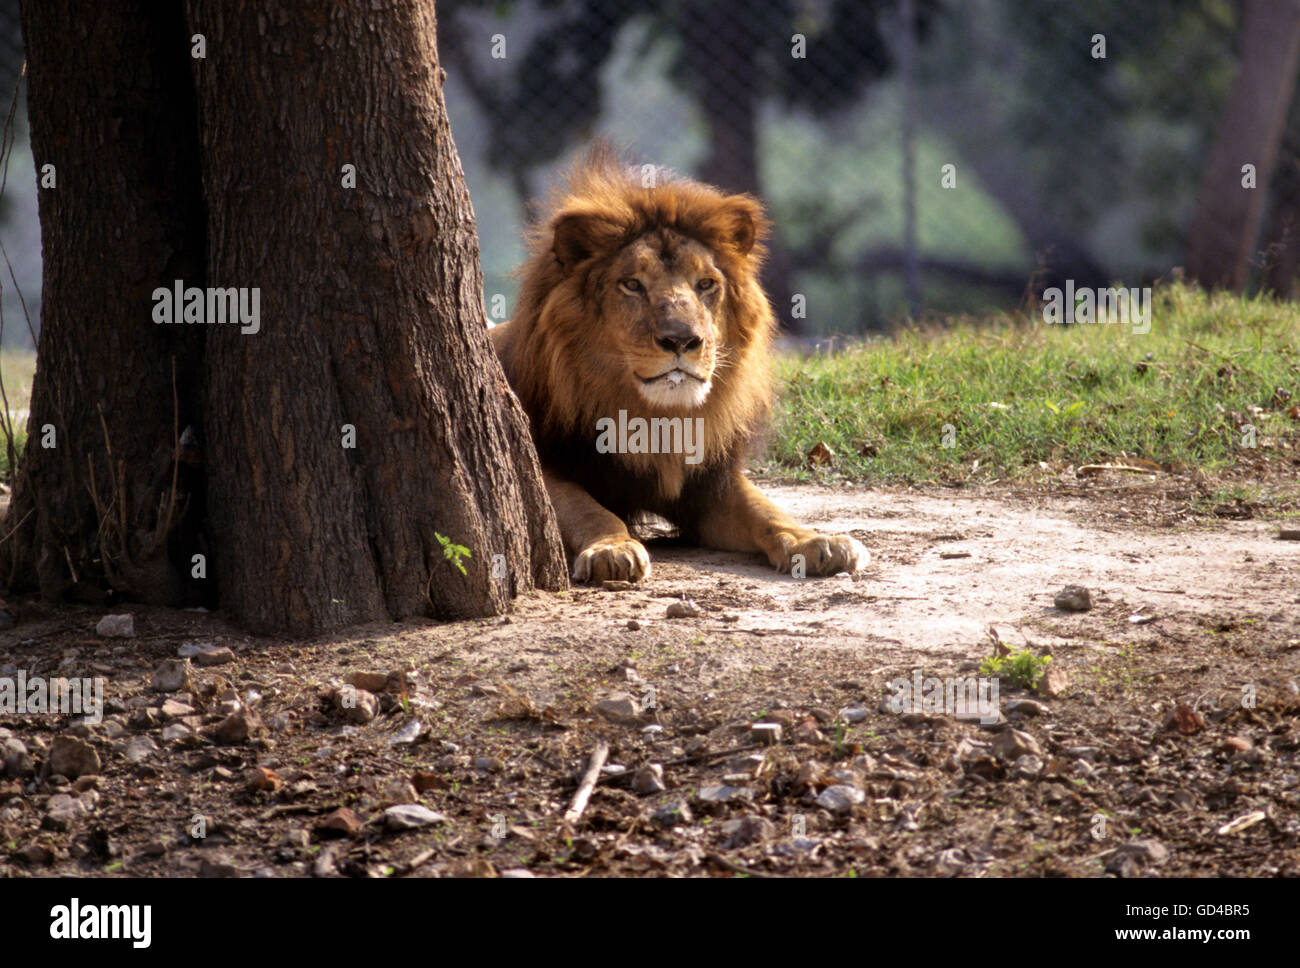 A lion in a zoo Stock Photo